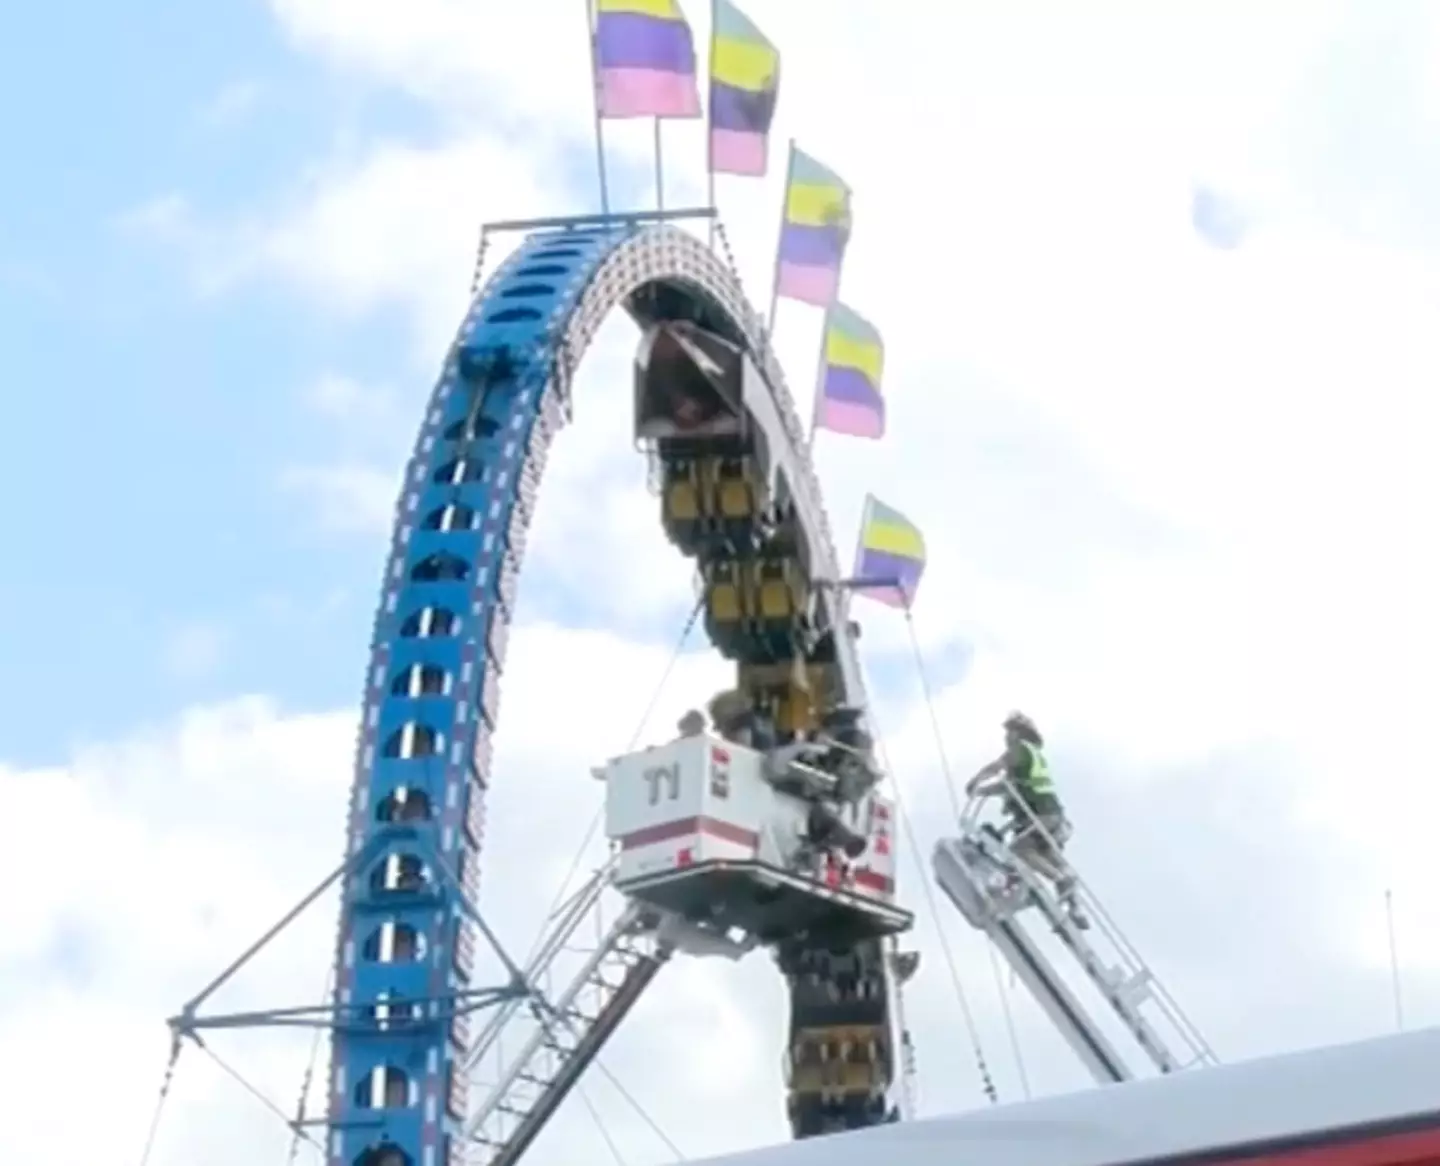 Firefighters had to use a raised platform to reach the riders.